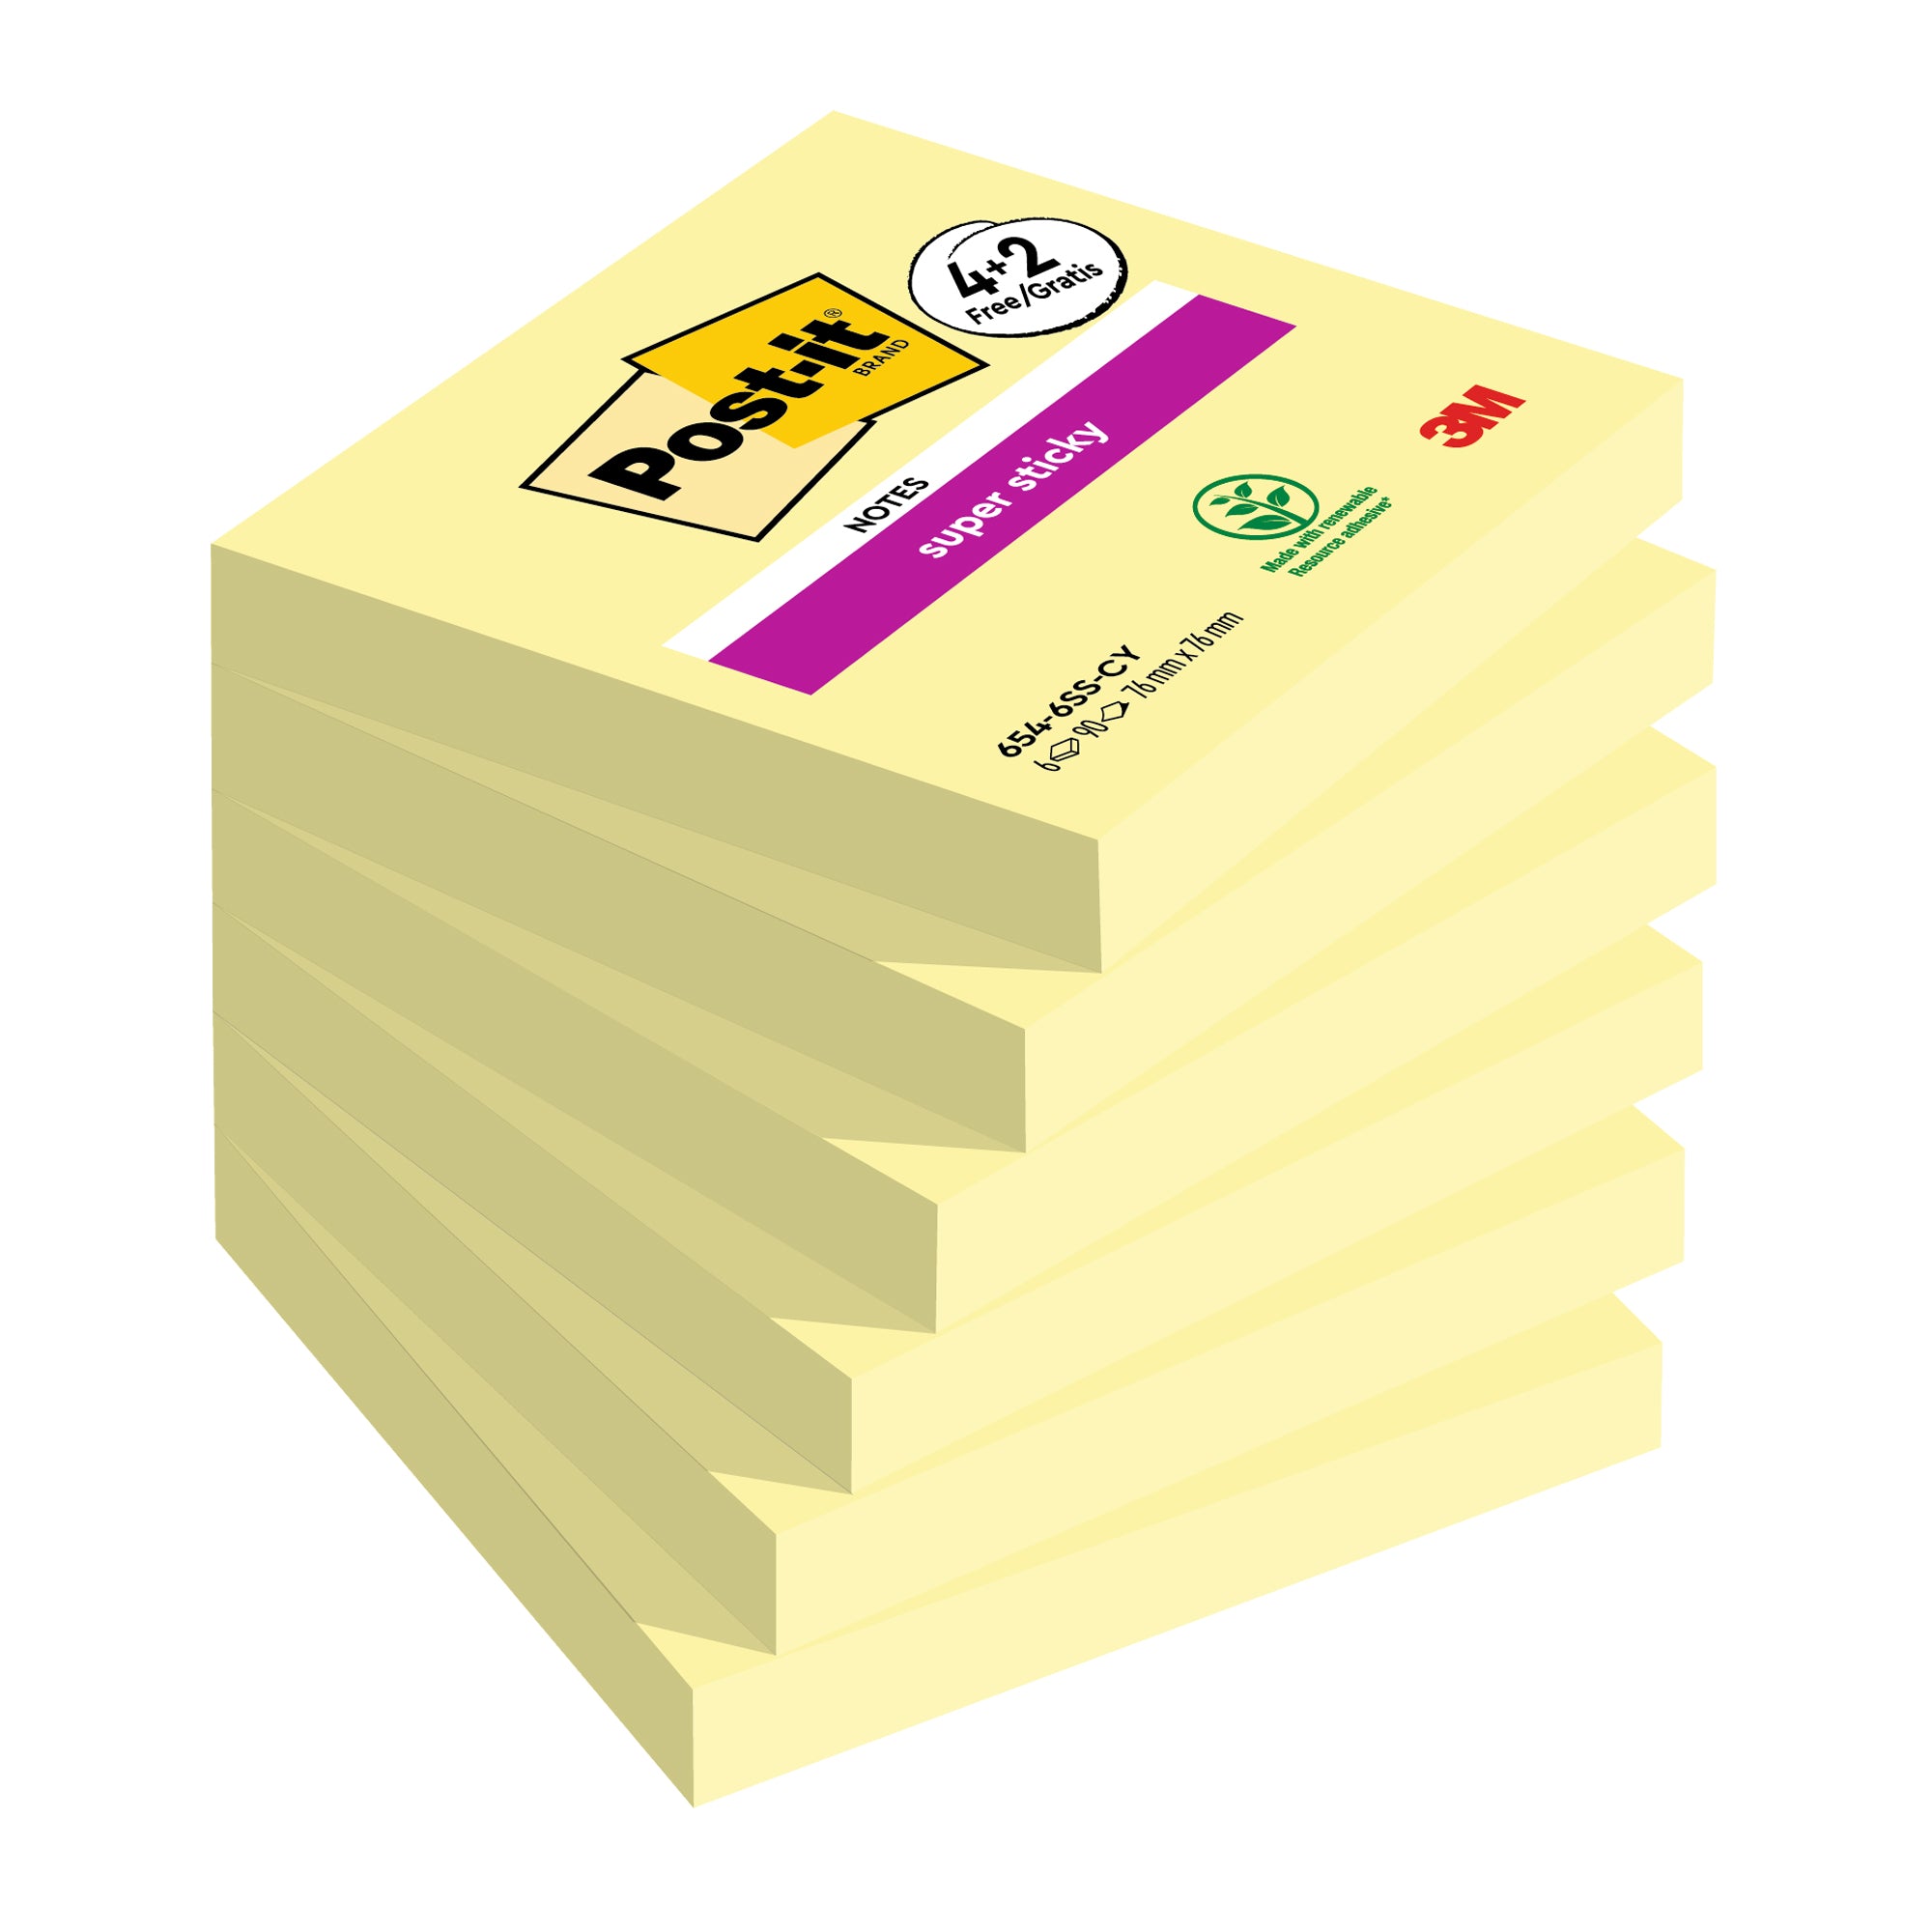 post-it-value-pack-42-super-sticky-giallo-canary-76x76-mm-90-fogl-blocco